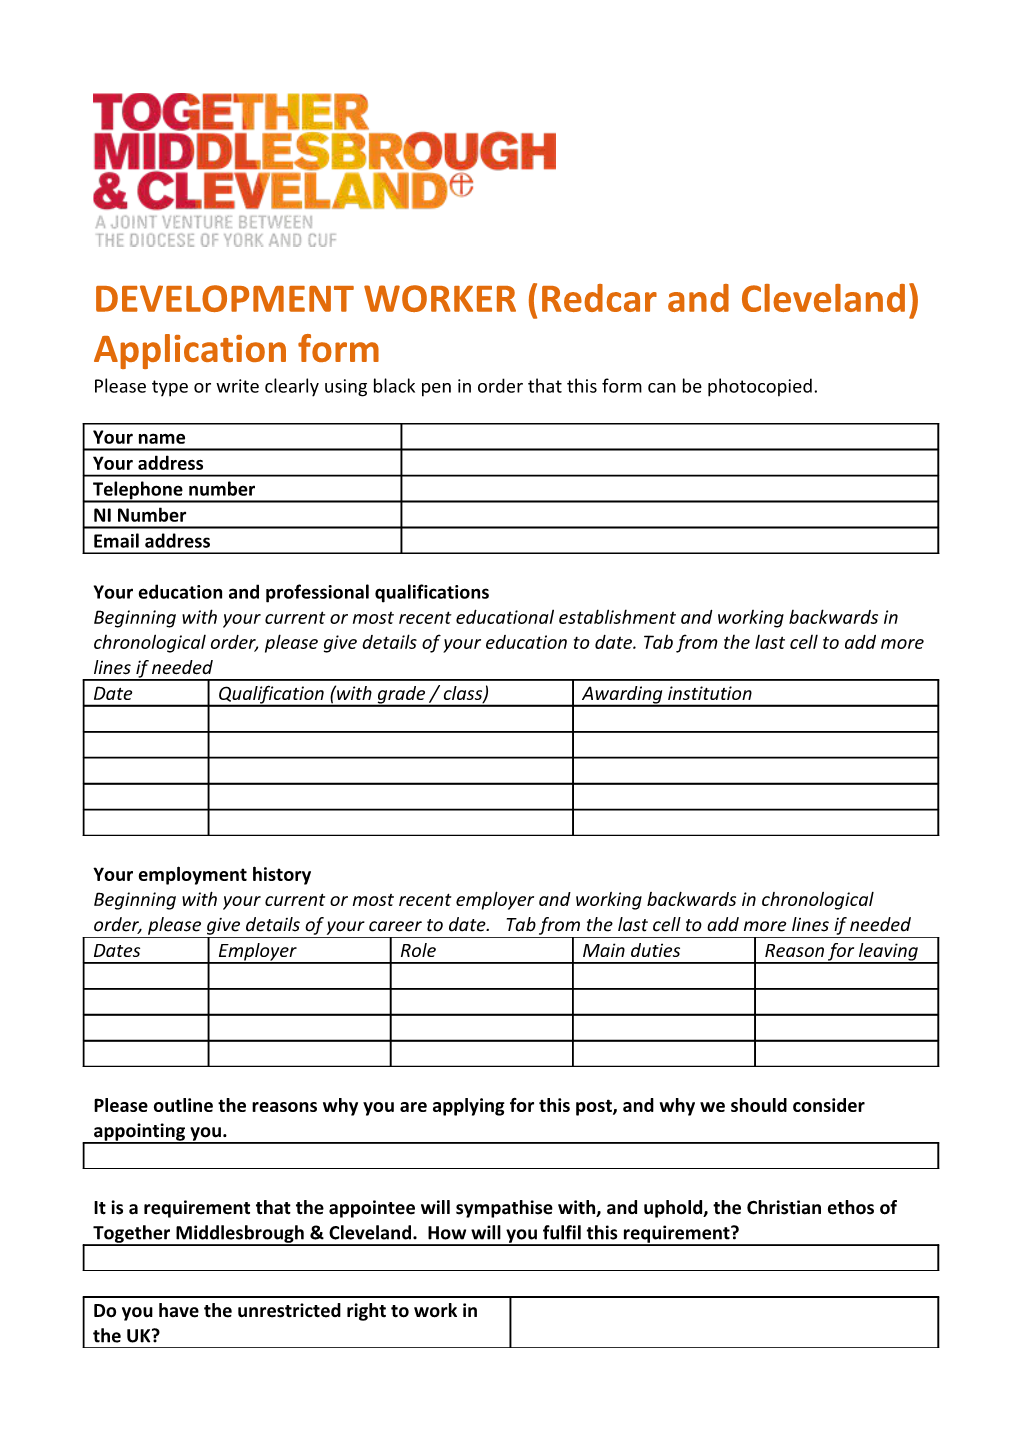 DEVELOPMENT WORKER (Redcar and Cleveland)